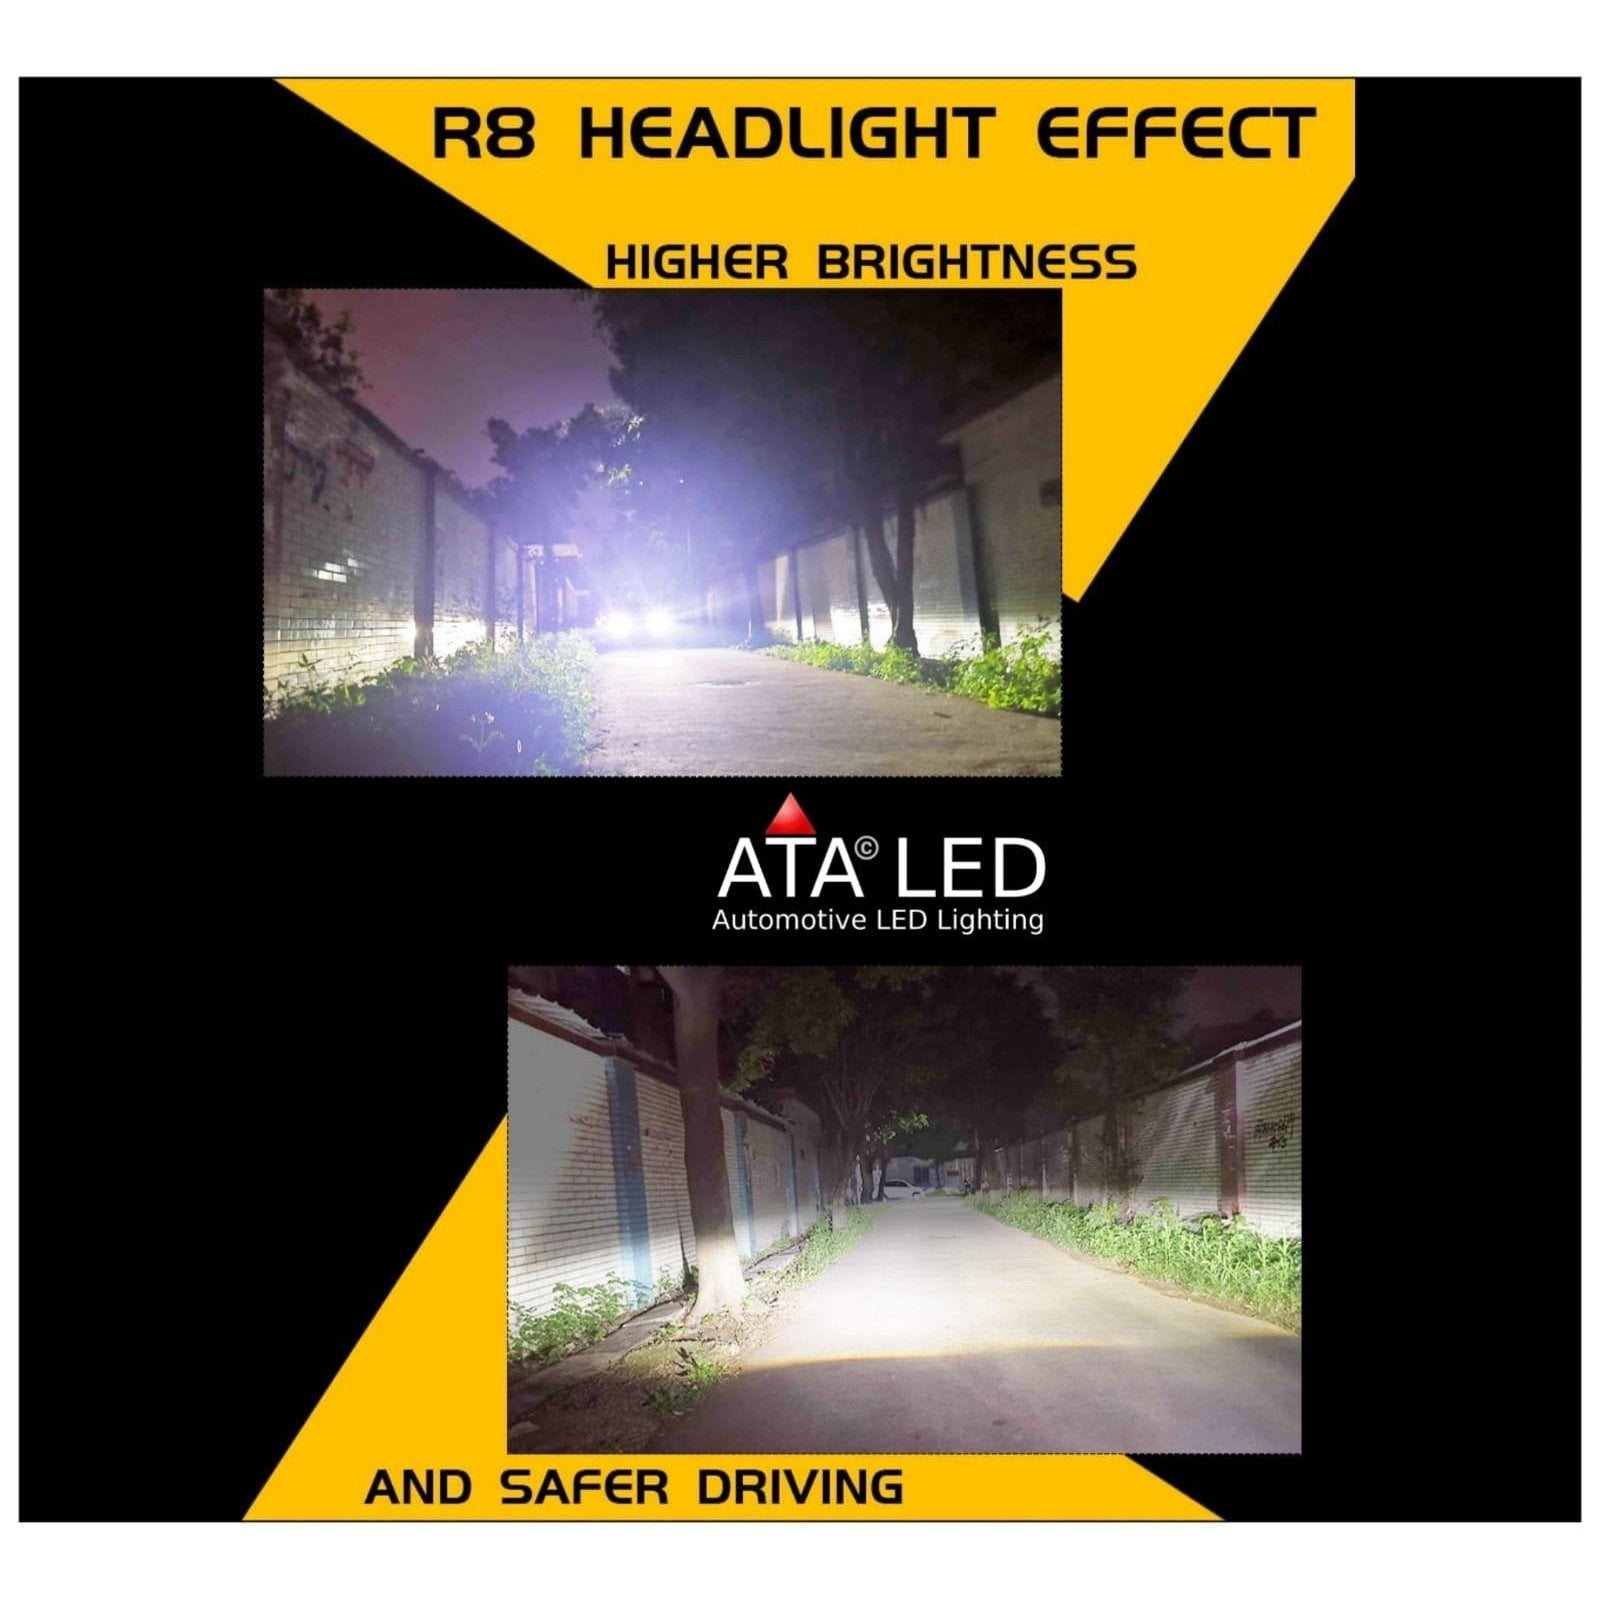 R8 Headlight effect Higher brightness and safer driving